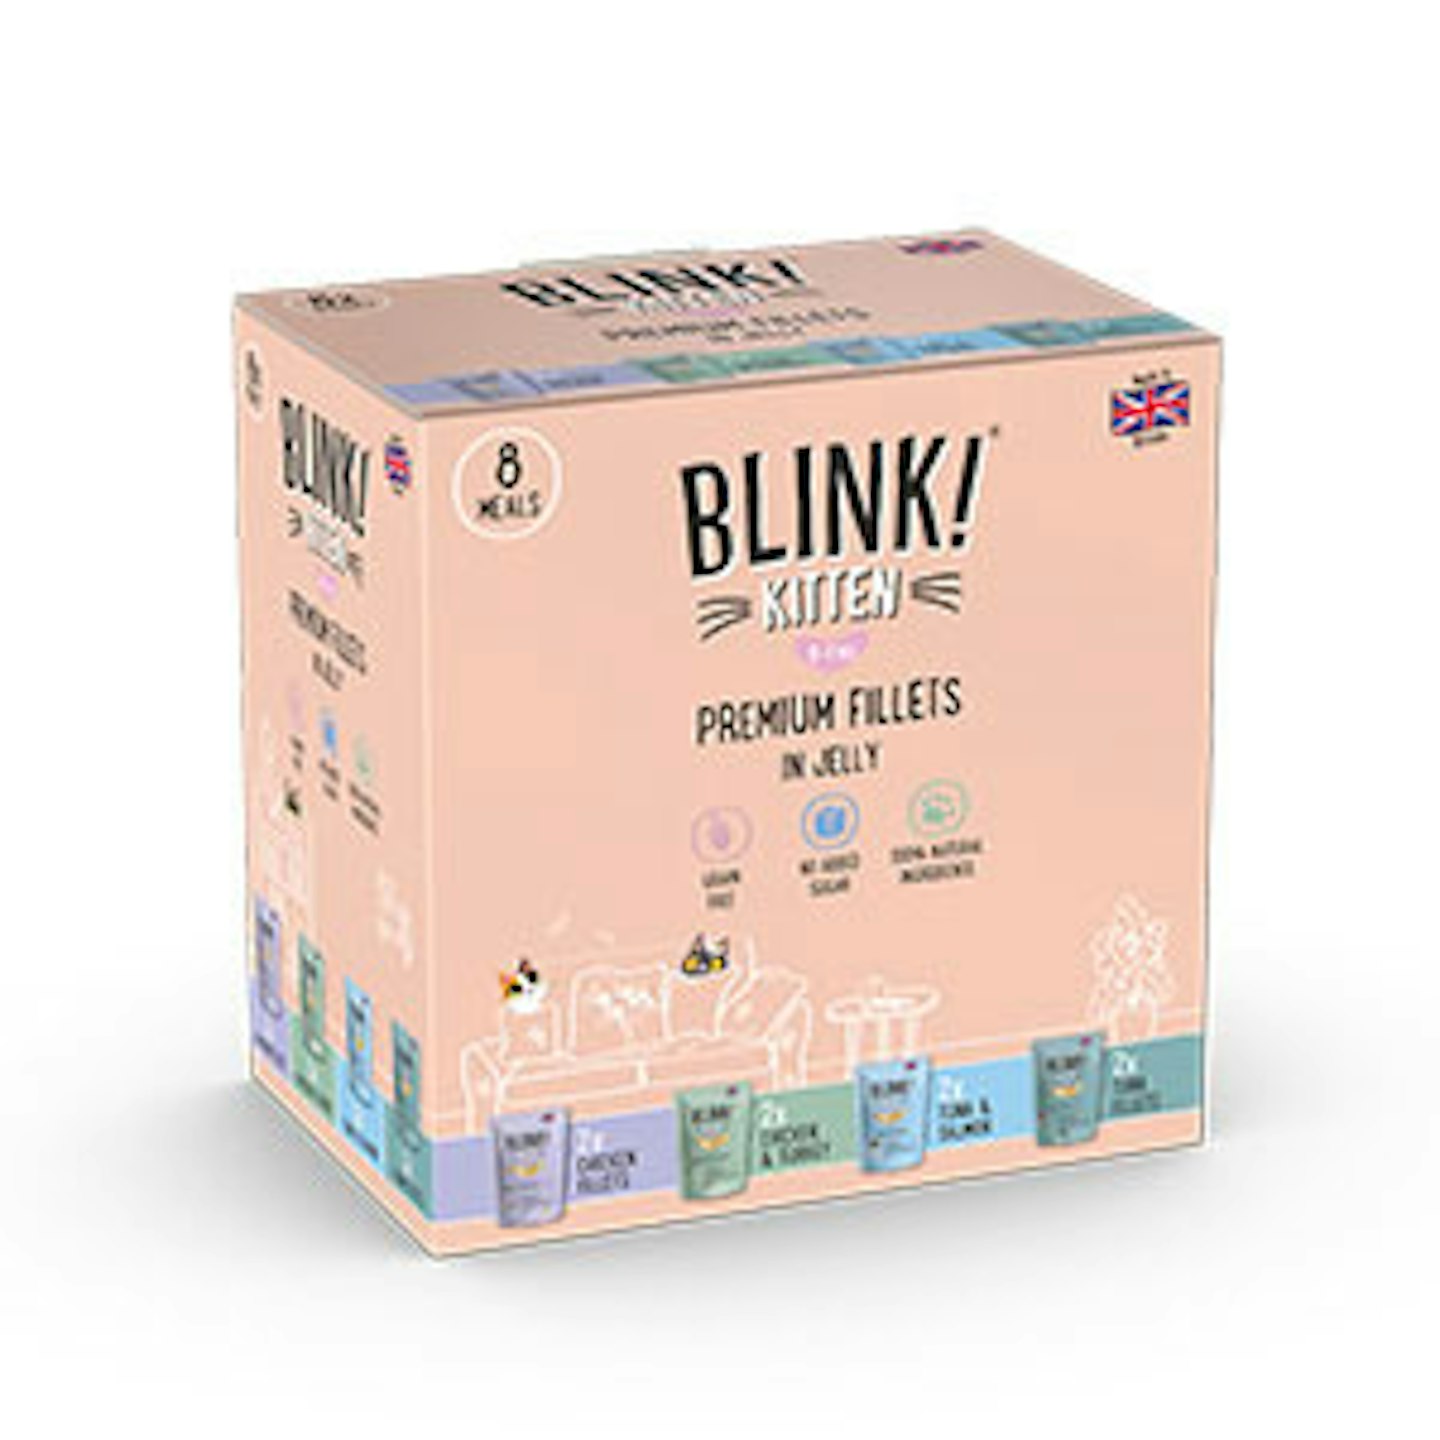 Blink! Wet Kitten Food Chicken and Fish Premium Fillets in Jelly Pouches 8x85g